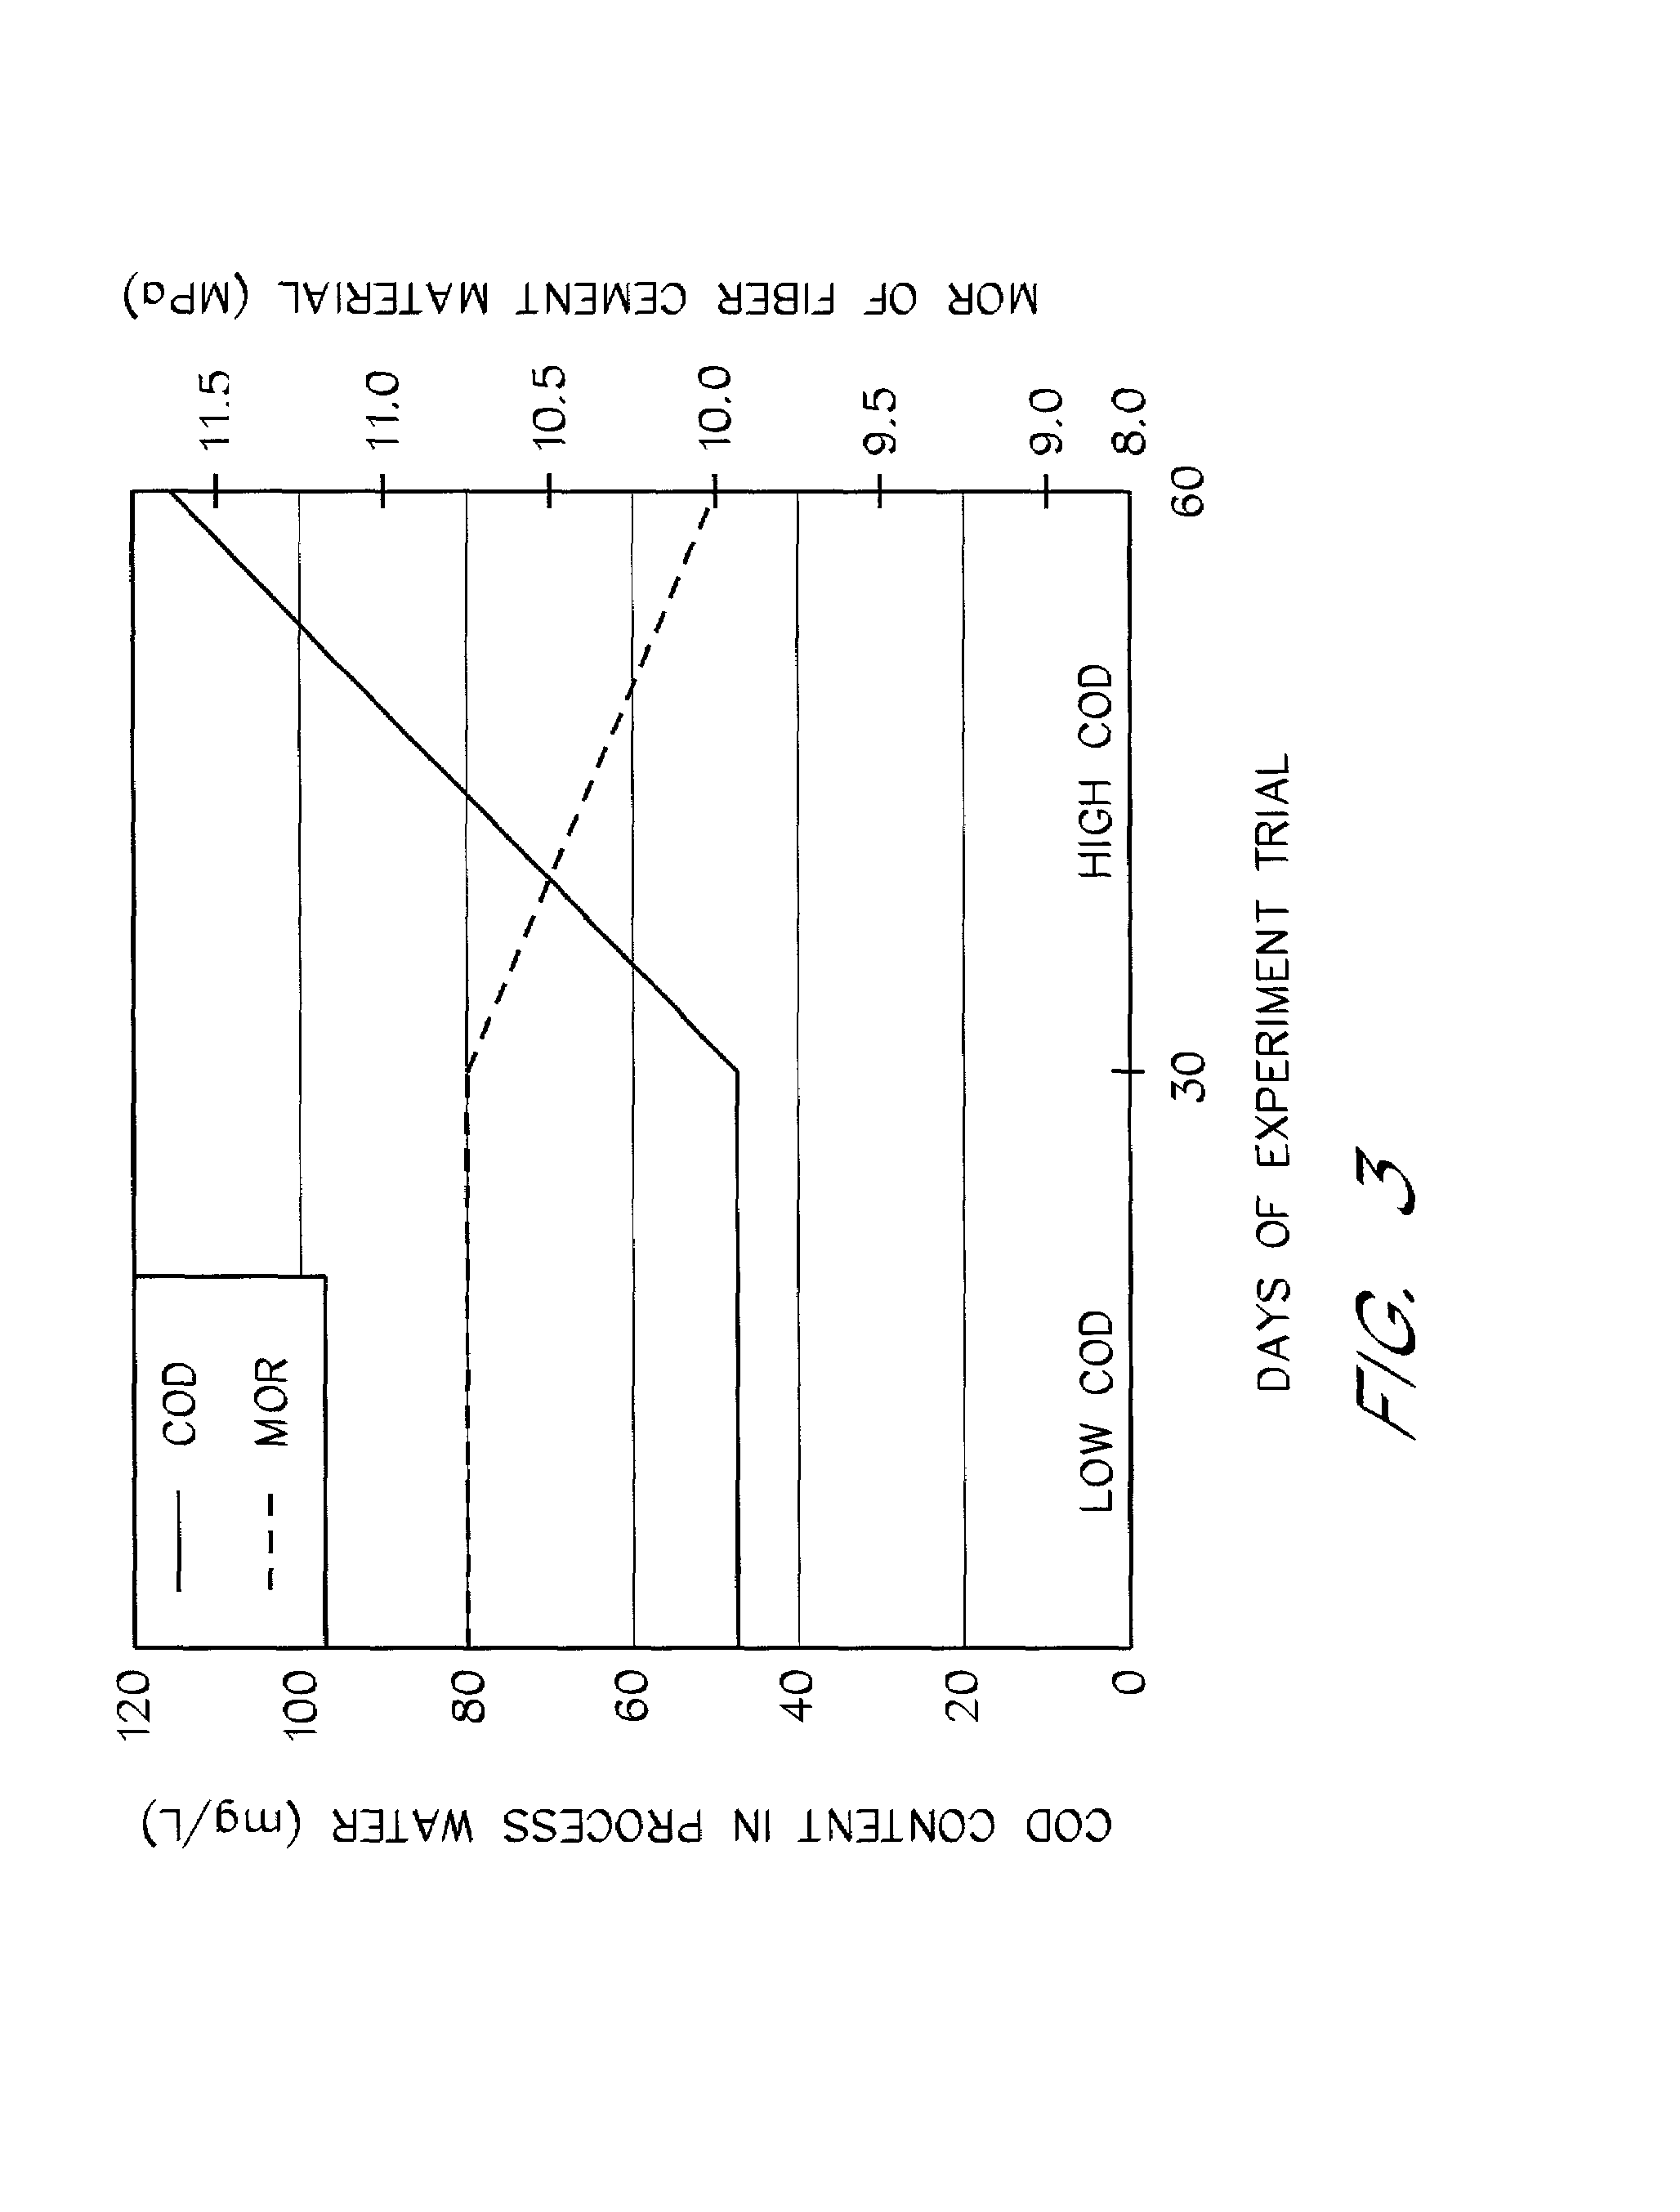 Method and apparatus for reducing impurities in cellulose fibers for manufacture of fiber reinforced cement composite materials